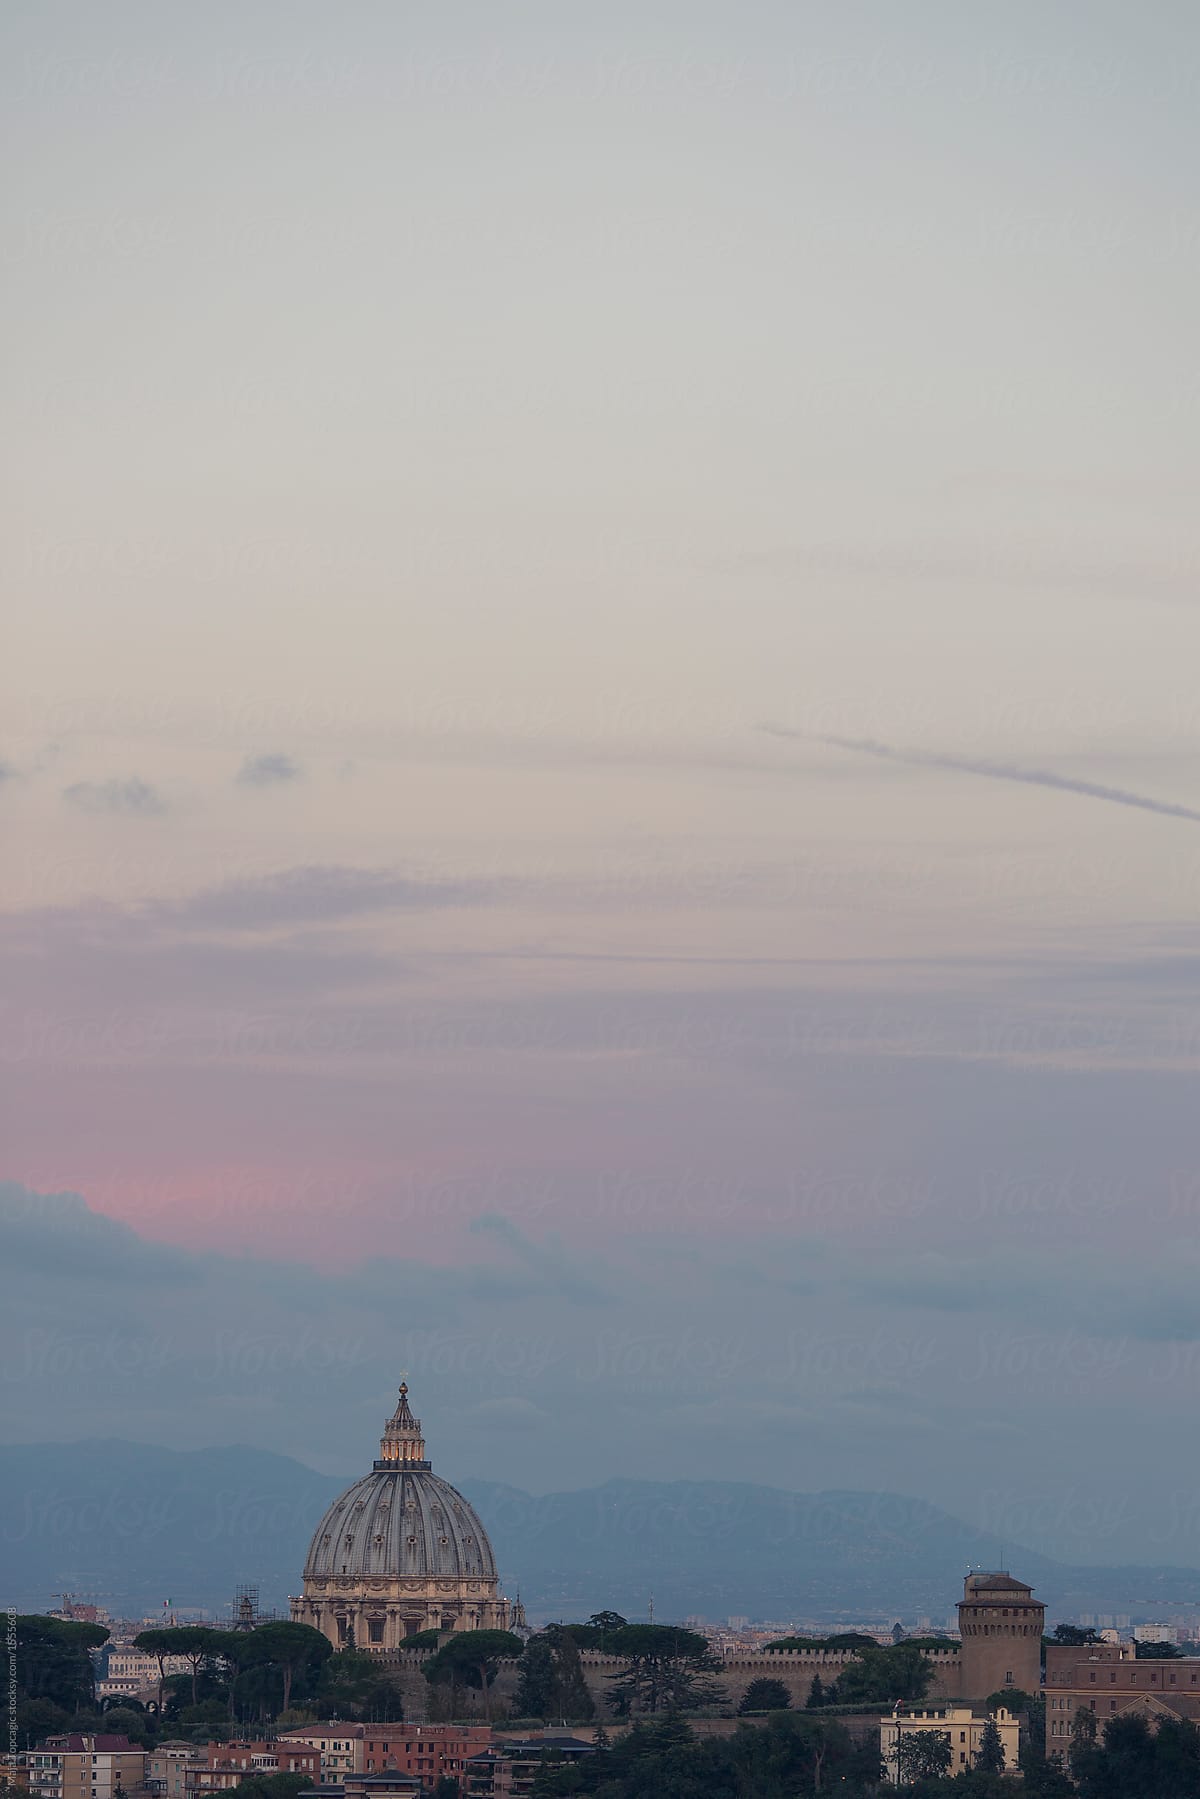 View on Saint Peter´s Basilica in Rome at sunset